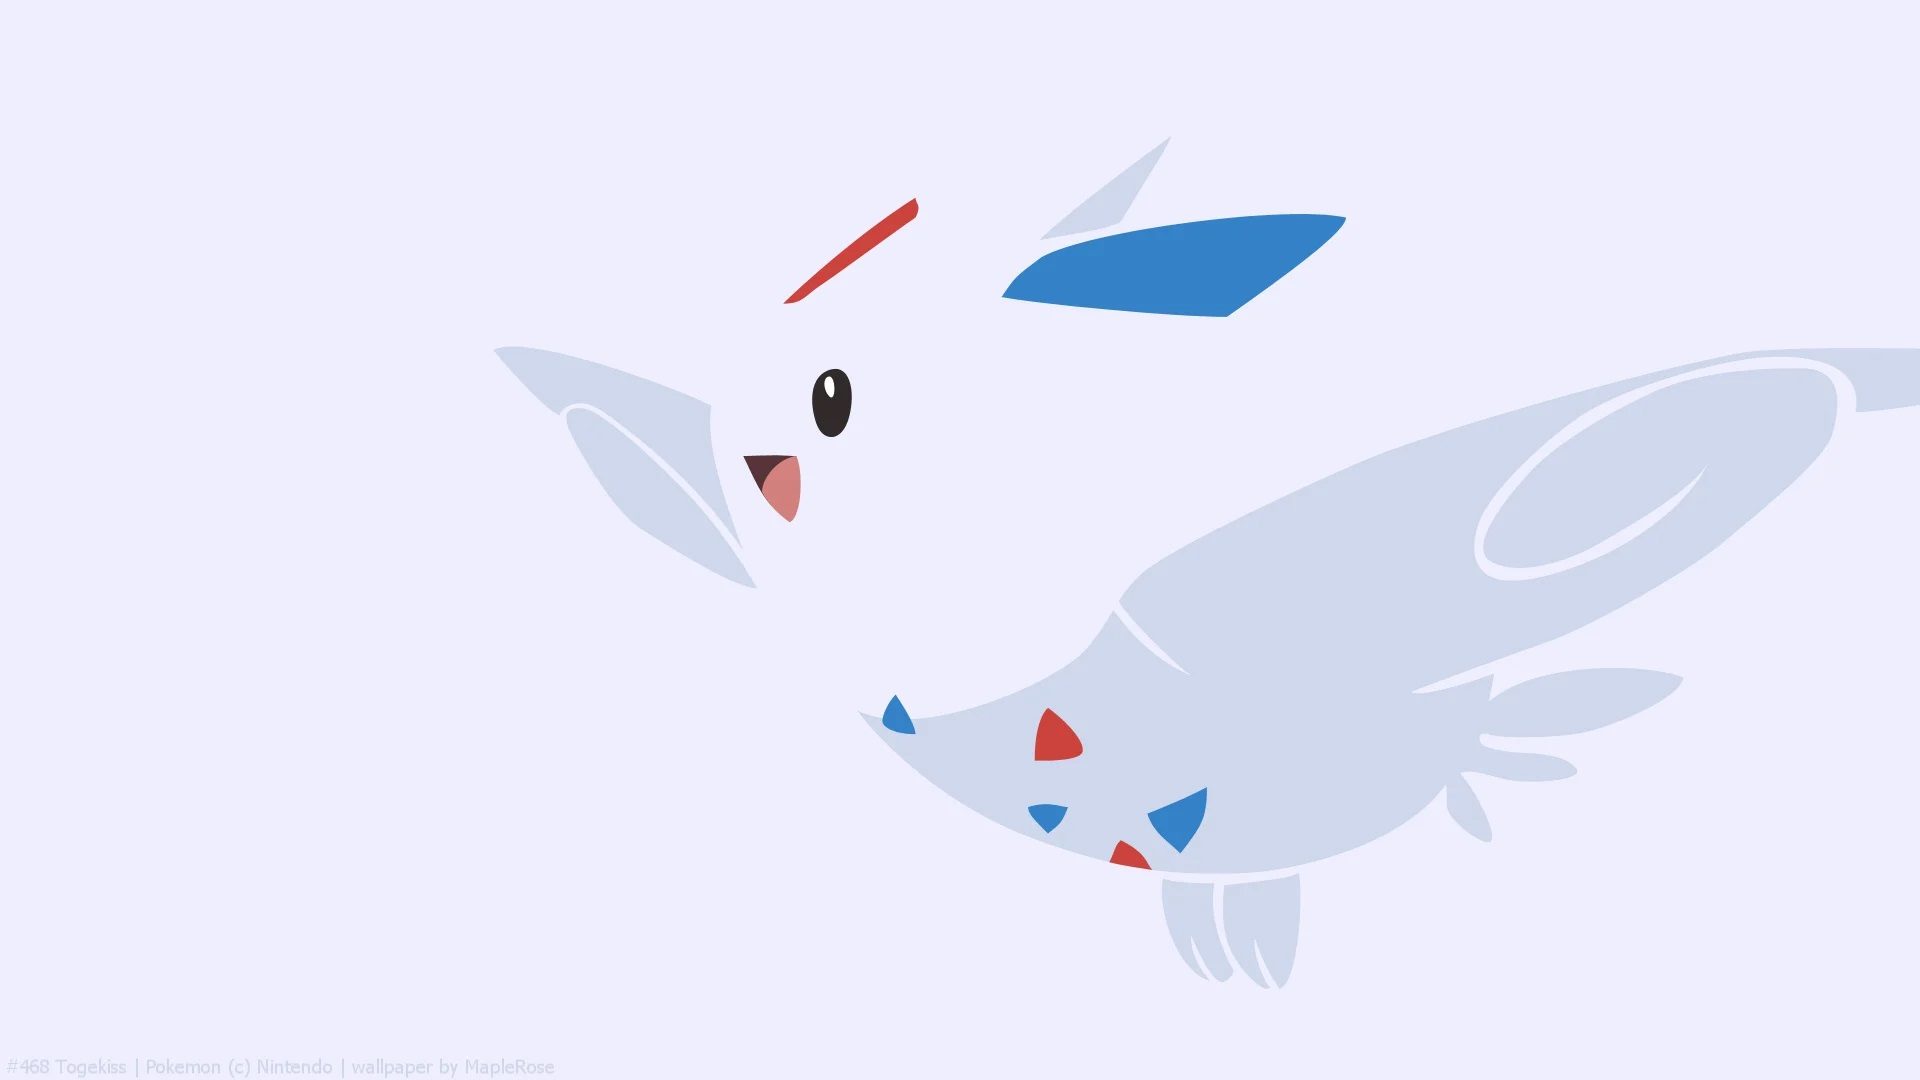 PoGO – Pokémon Go: Togekiss - 15 counters to the raid boss in the guide!